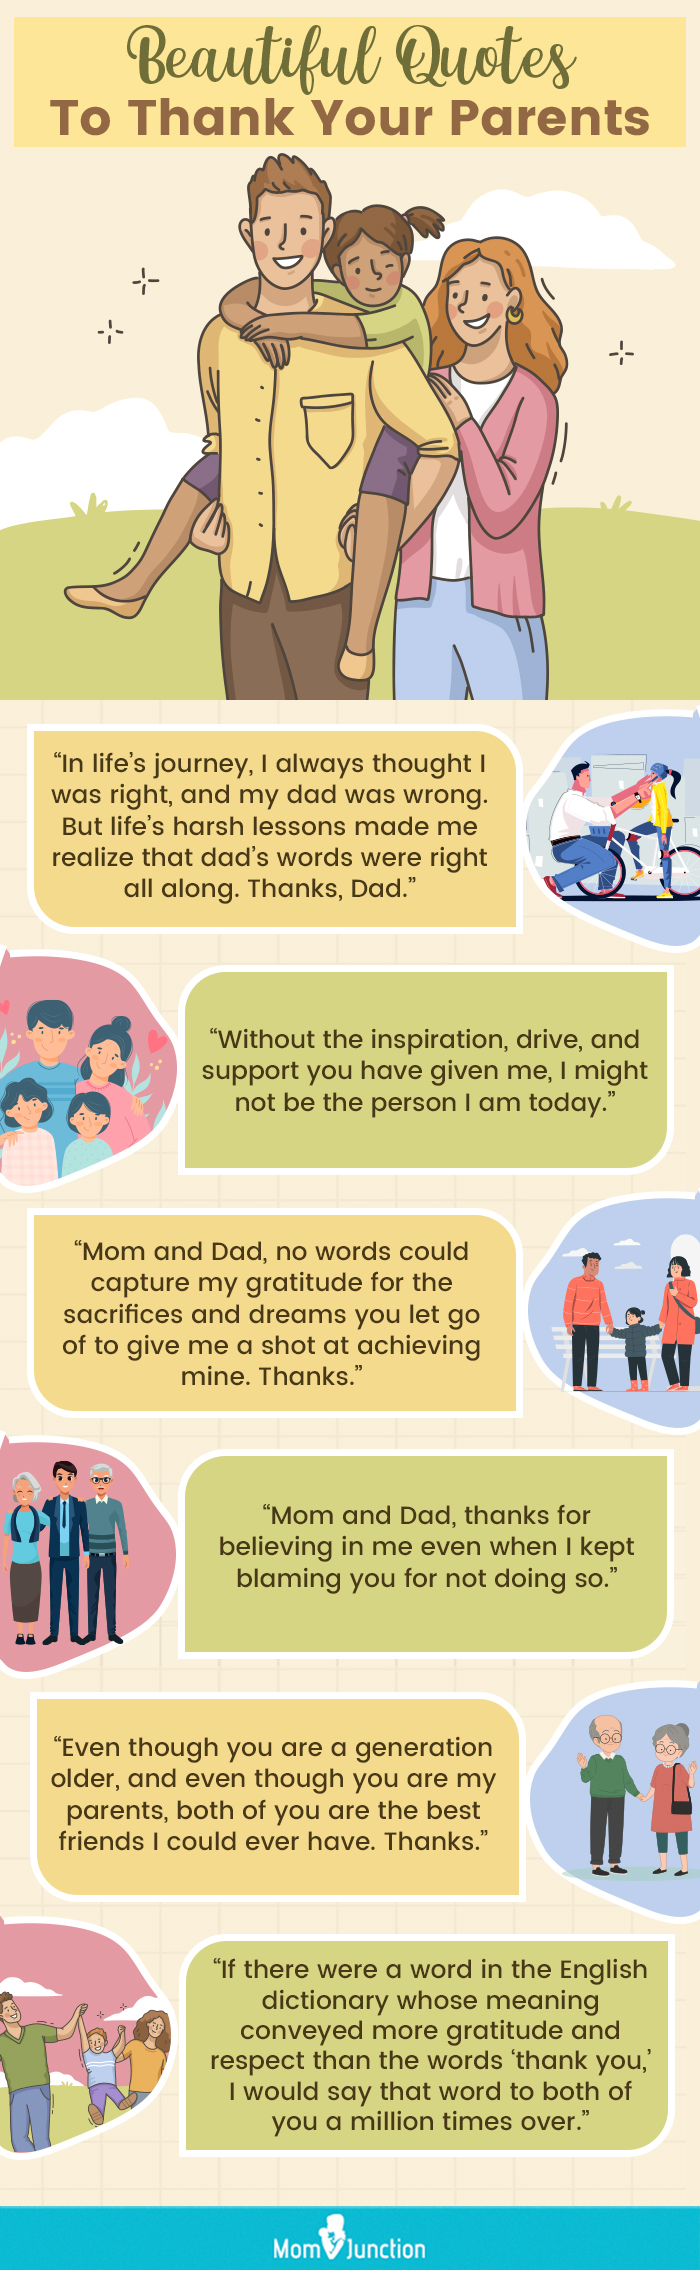 beautiful quotes to thank your parents [infographic]